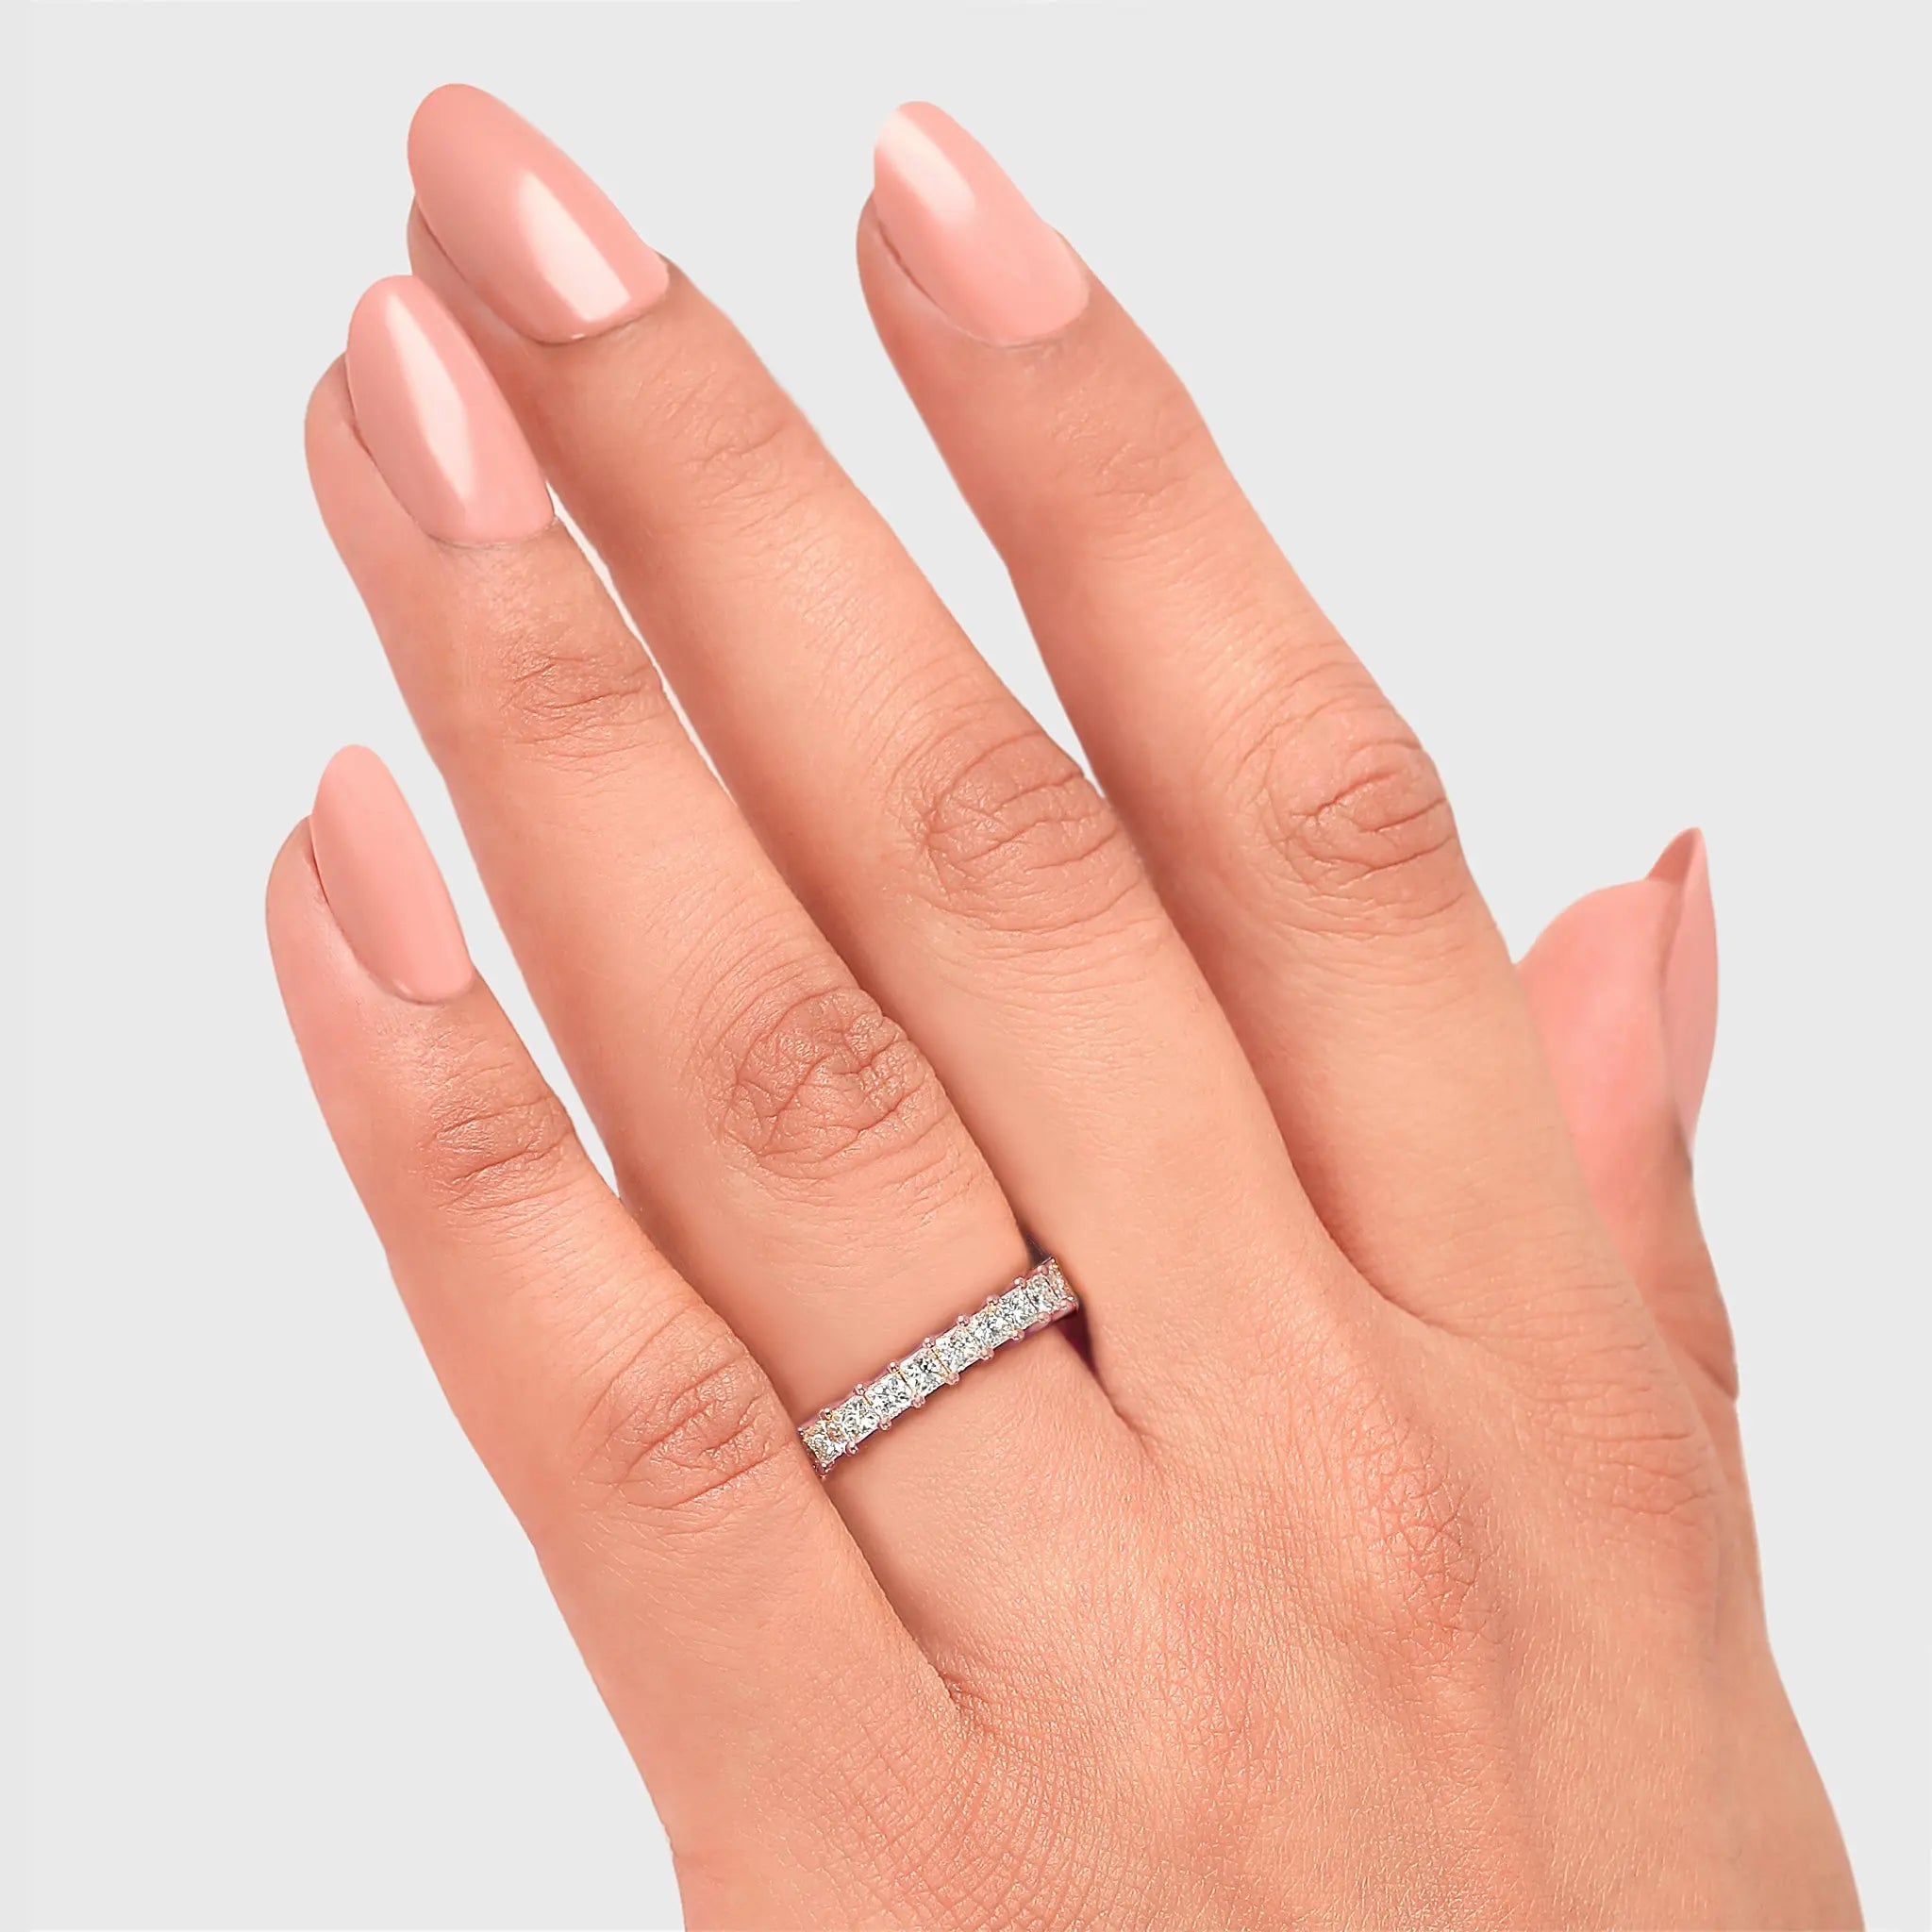 Shimansky - Women Wearing the My Girl Claw set Full Eternity Diamond Ring 2.30ct Crafted in 18K Rose Gold